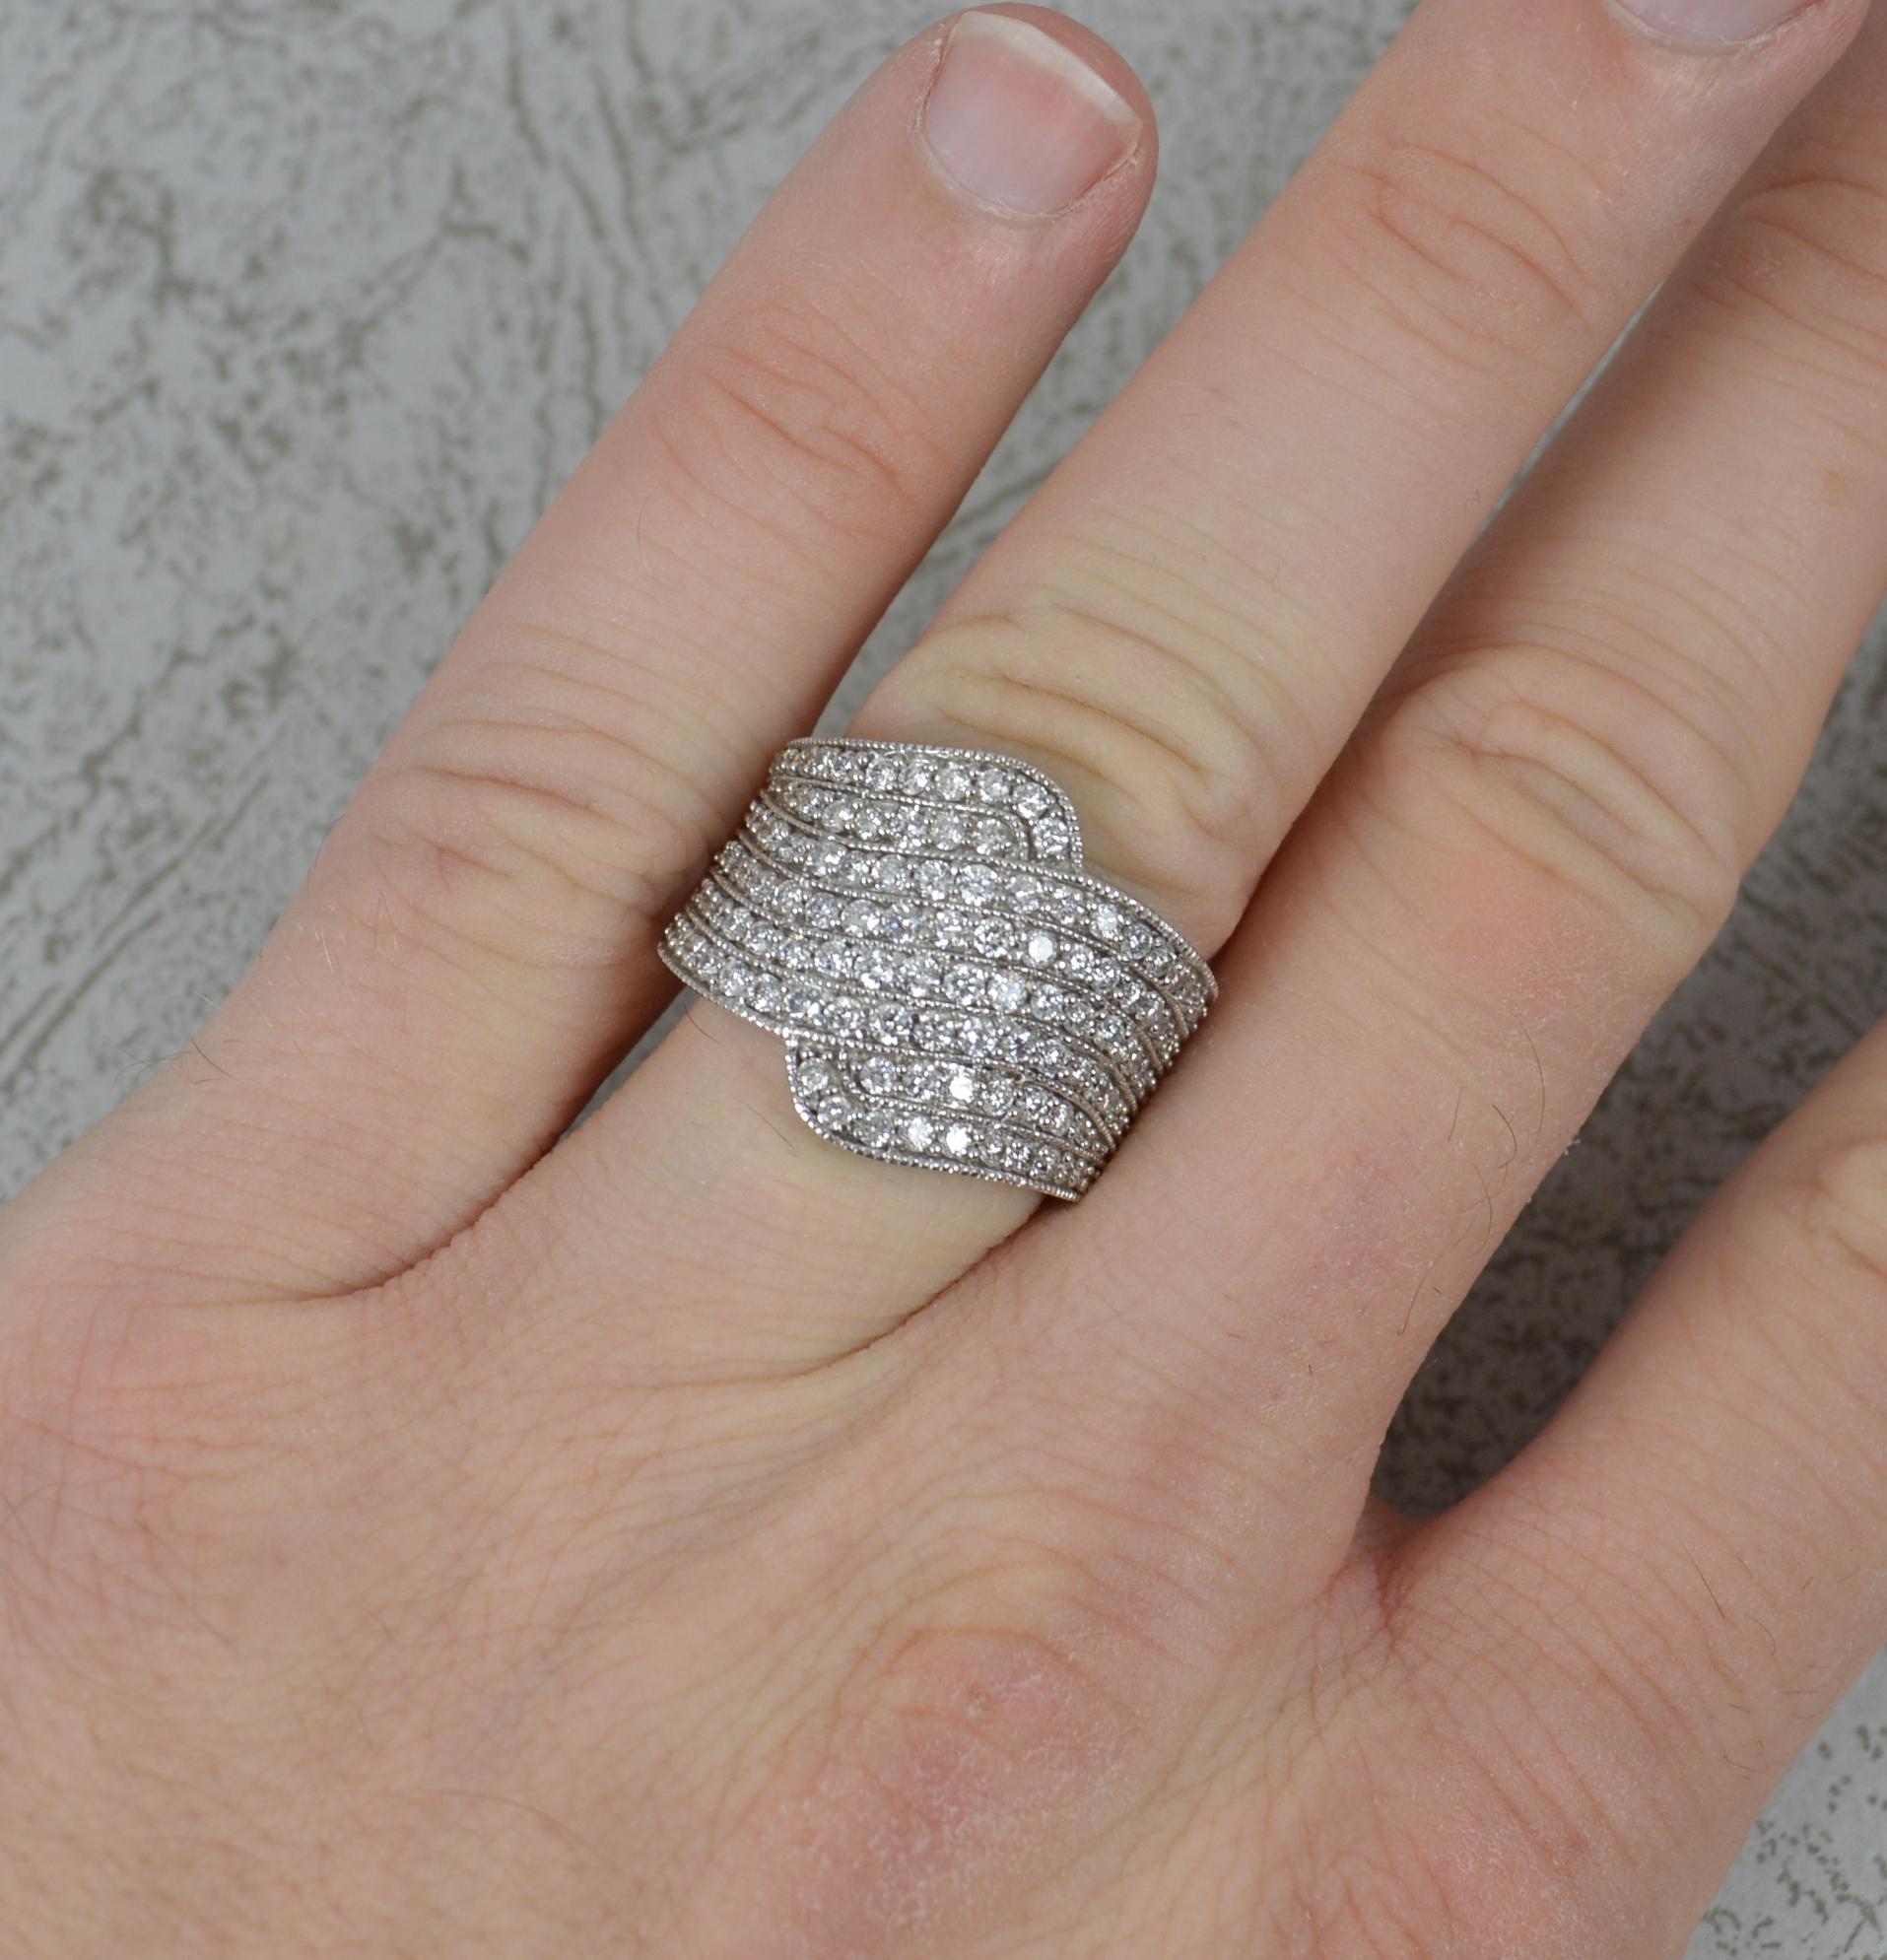 A large natural diamond cluster cocktail ring.
Solid 18 carat white gold example.
Set with many natural round brilliant cut diamonds to total 1.50 carats as confirmed to the shank. Si clarity, very clean and sparkly.
17mm x 22mm cluster.

CONDITION